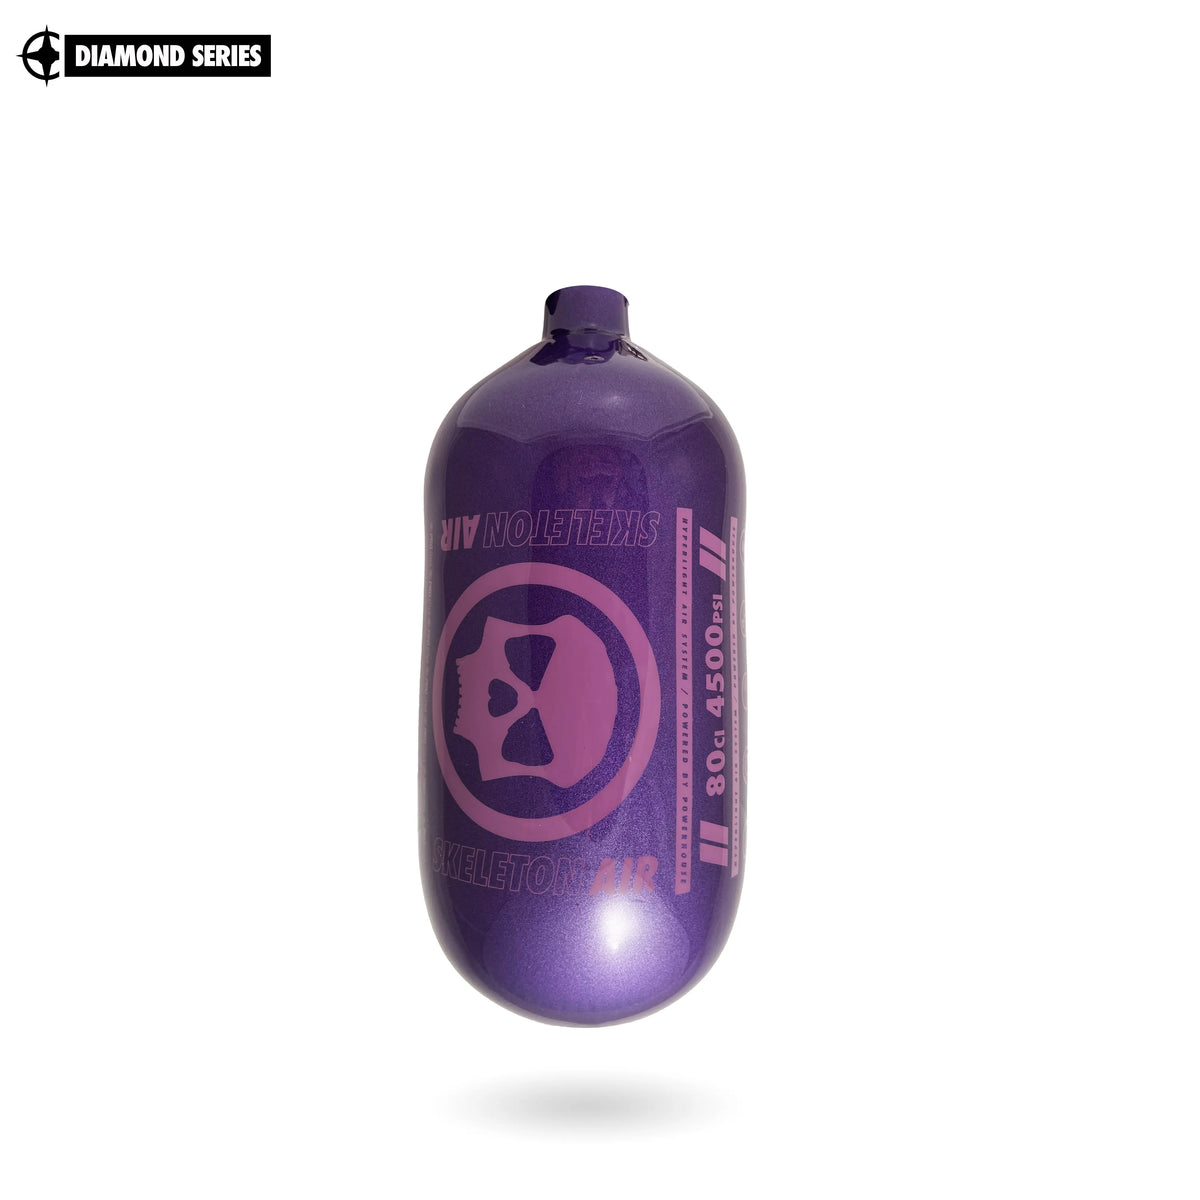 &quot;DIAMOND SERIES&quot; SKELETON AIR HYPERLIGHT AIR TANK 80CI (BOTTLE ONLY) Infamous Paintball